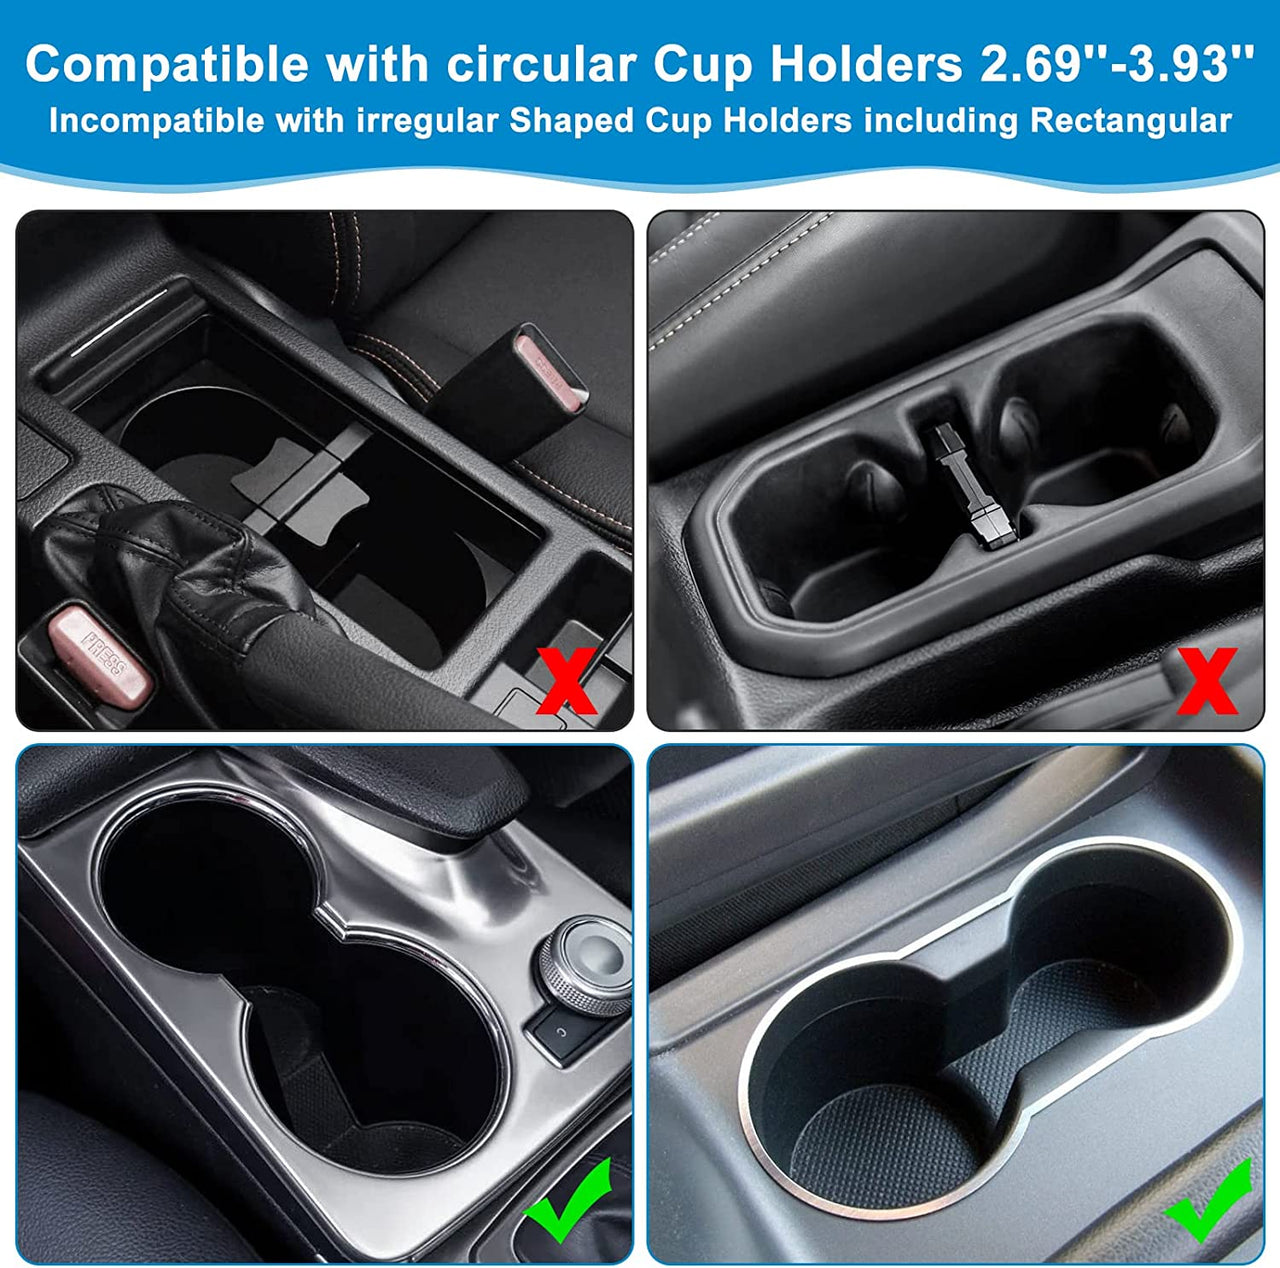 Car Cup Holder 2-in-1, Custom-Fit For Car, Car Cup Holder Expander Adapter with Adjustable Base, Car Cup Holder Expander Organizer with Phone Holder WAHY233